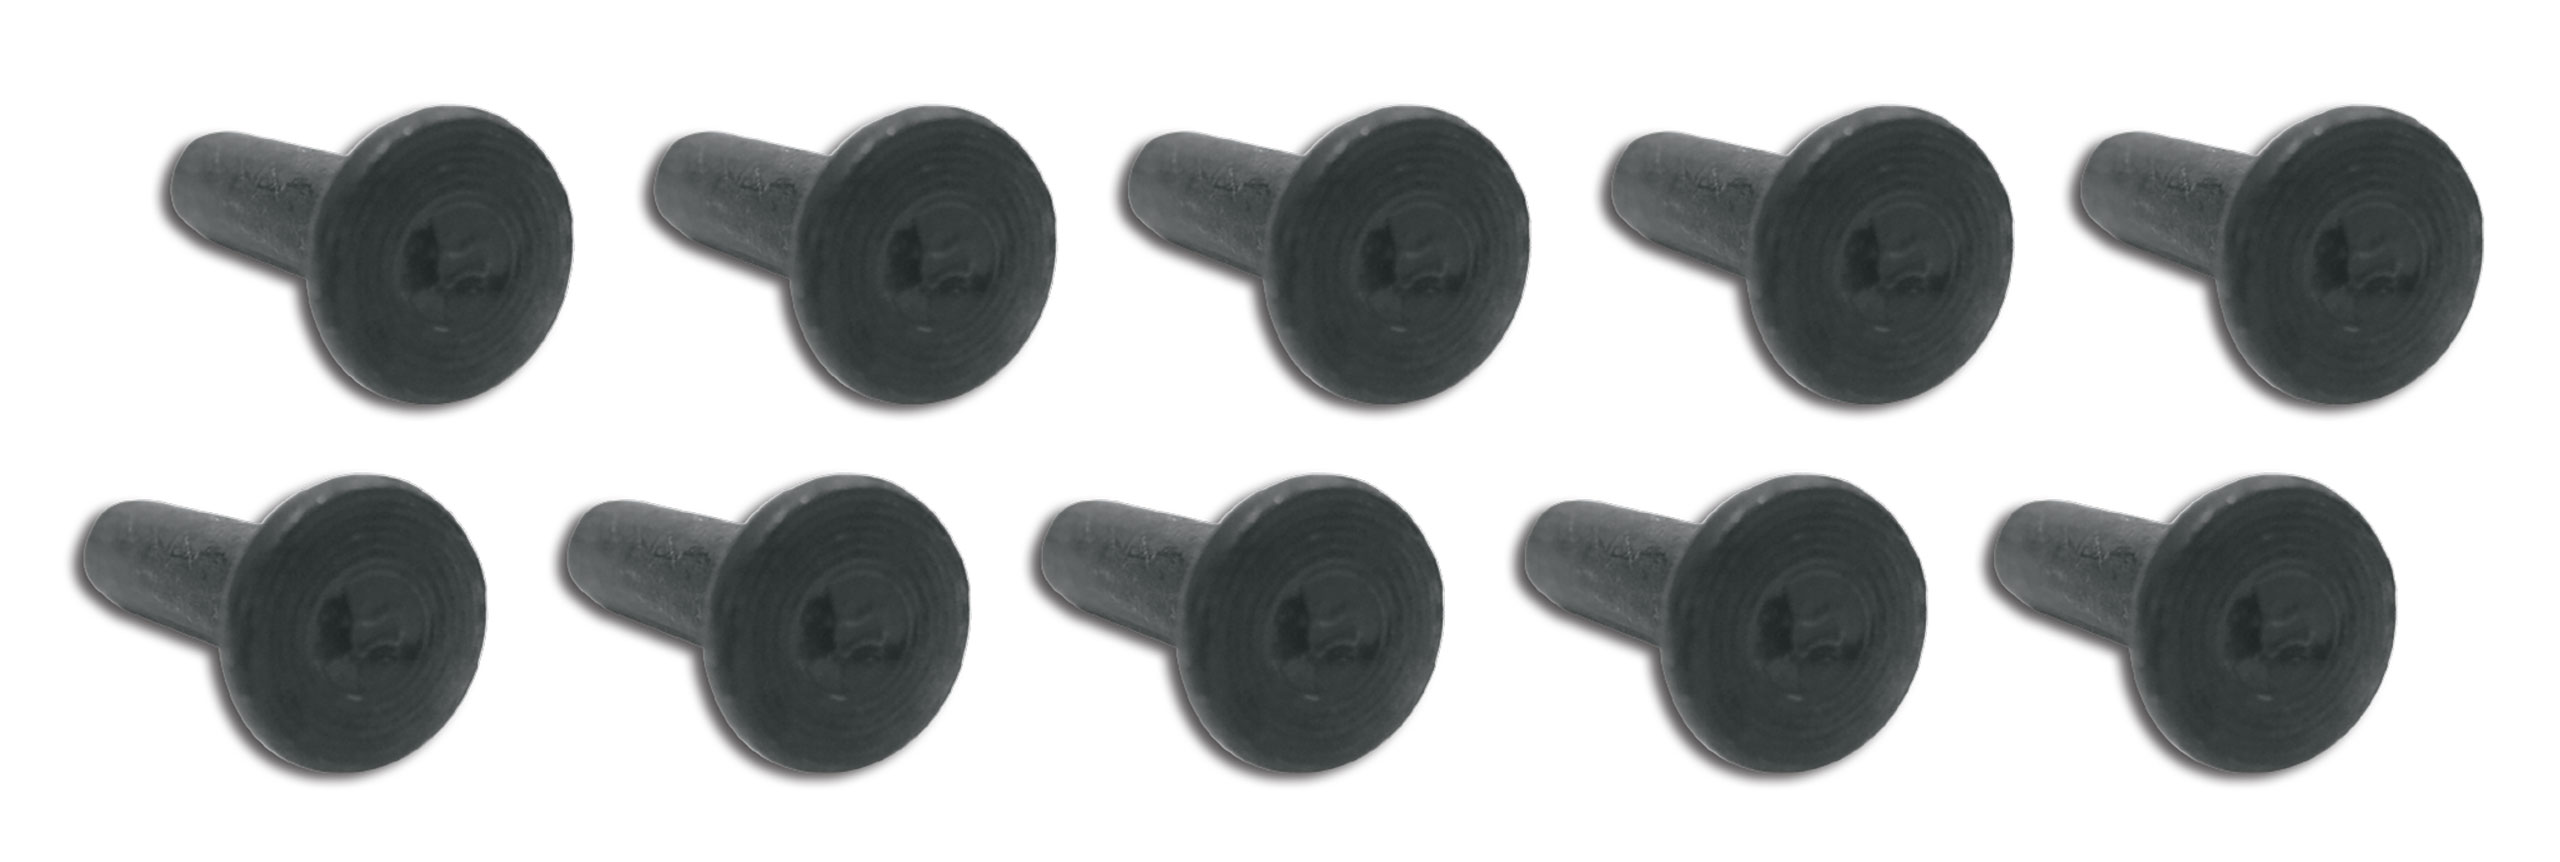 Auto Accessories of America 1965-1982 Chevrolet Corvette Rotor To Hub Rivets. Front 10 Piece Set